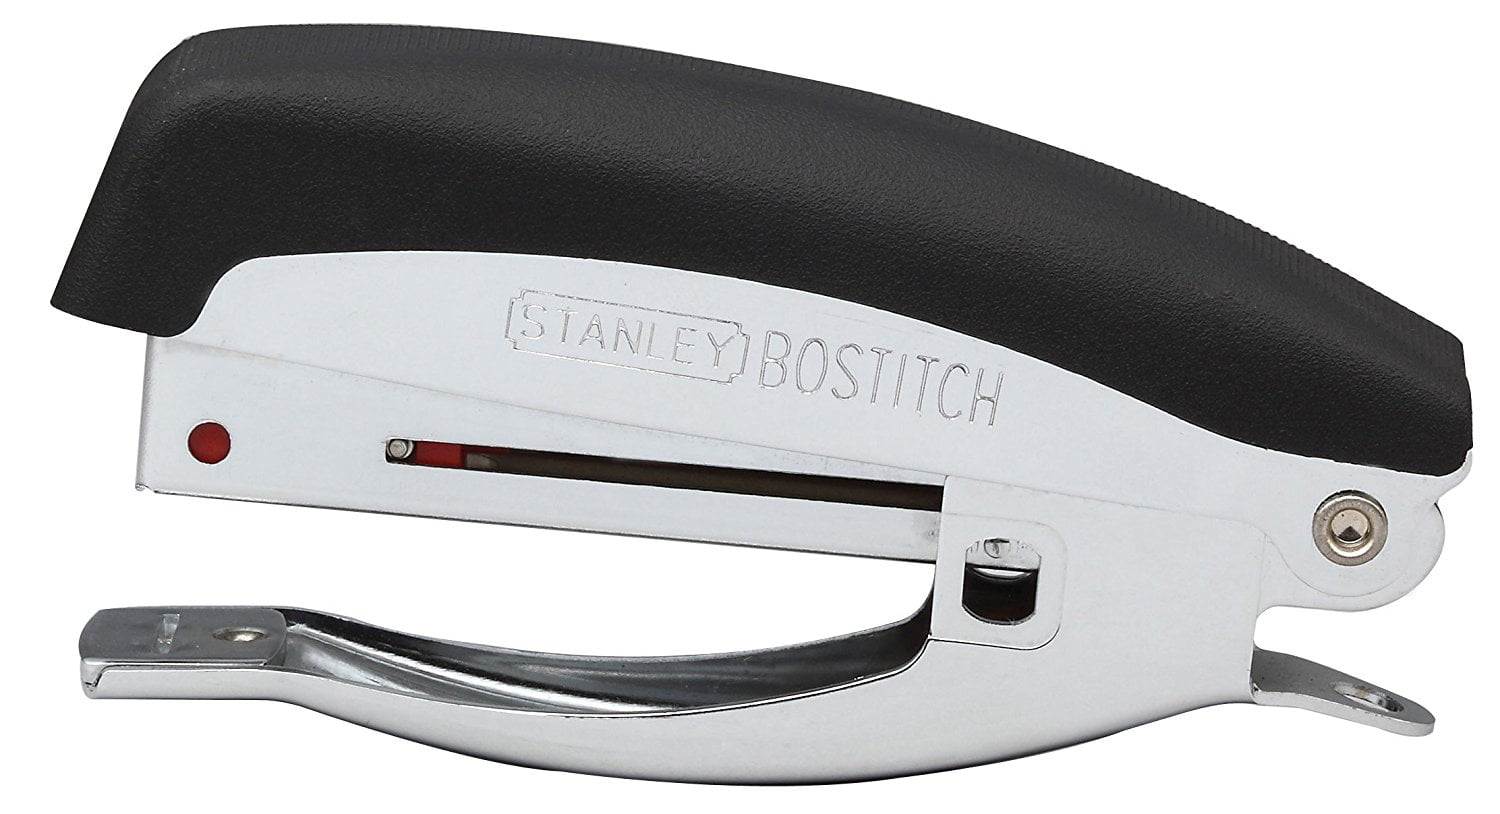 Bostitch Deluxe 20 Sheet Hand-Held Stapler with Anchor Hole ChromeBlack 42100 